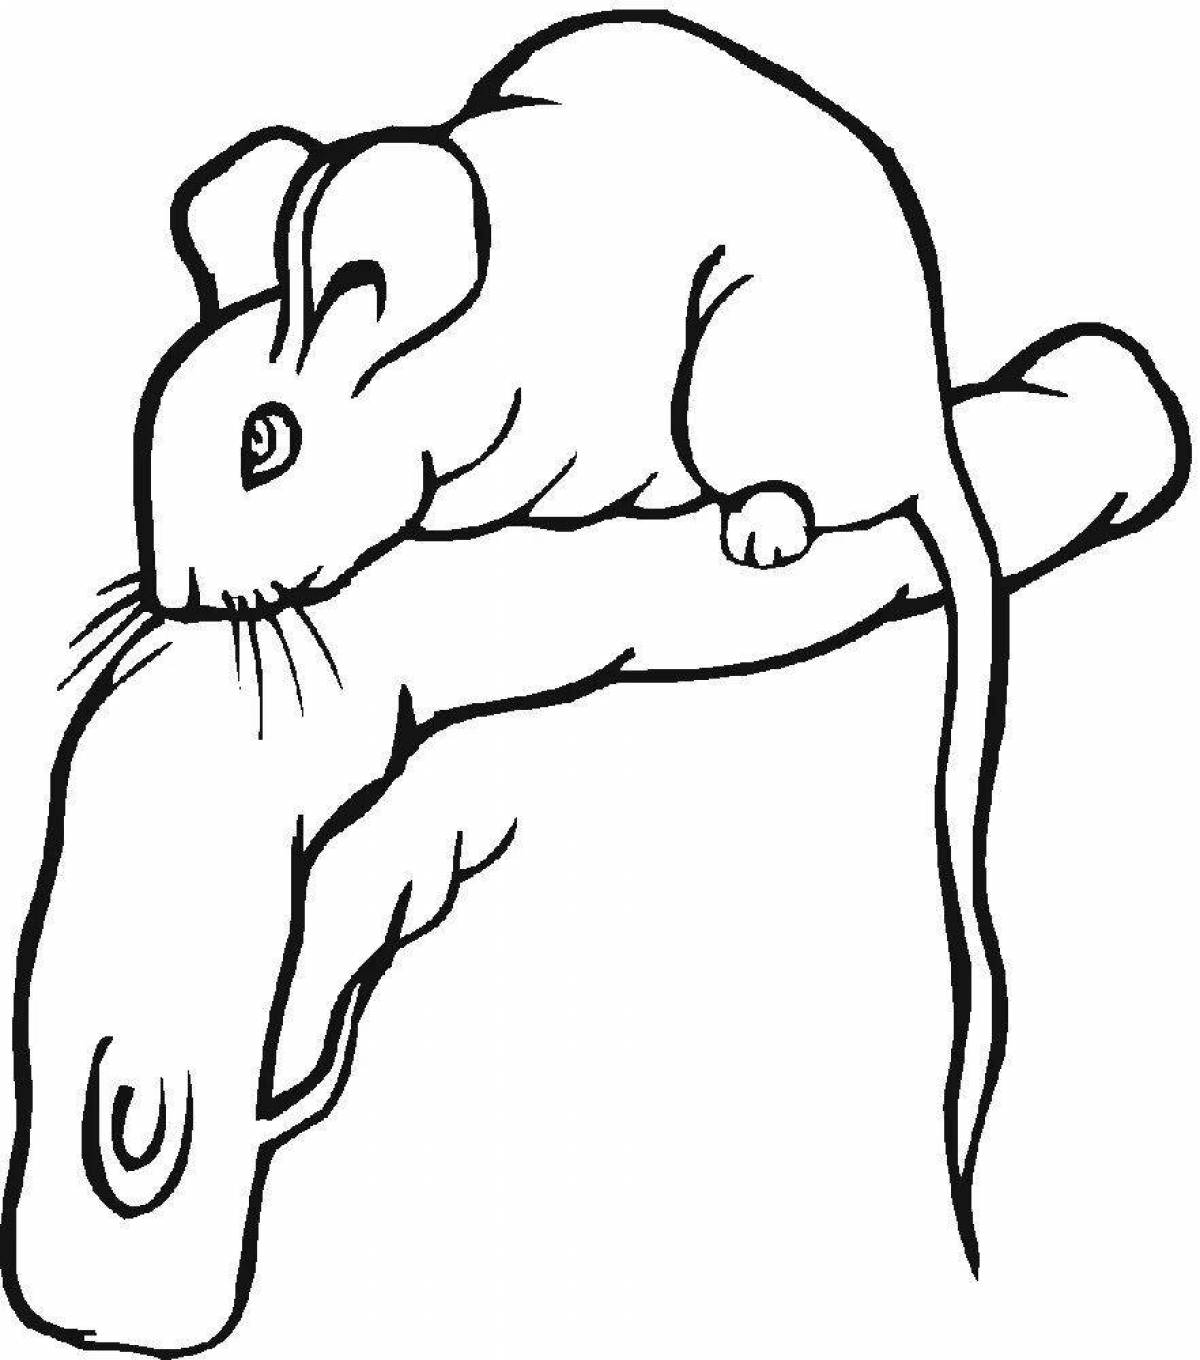 Coloring book charming dormouse